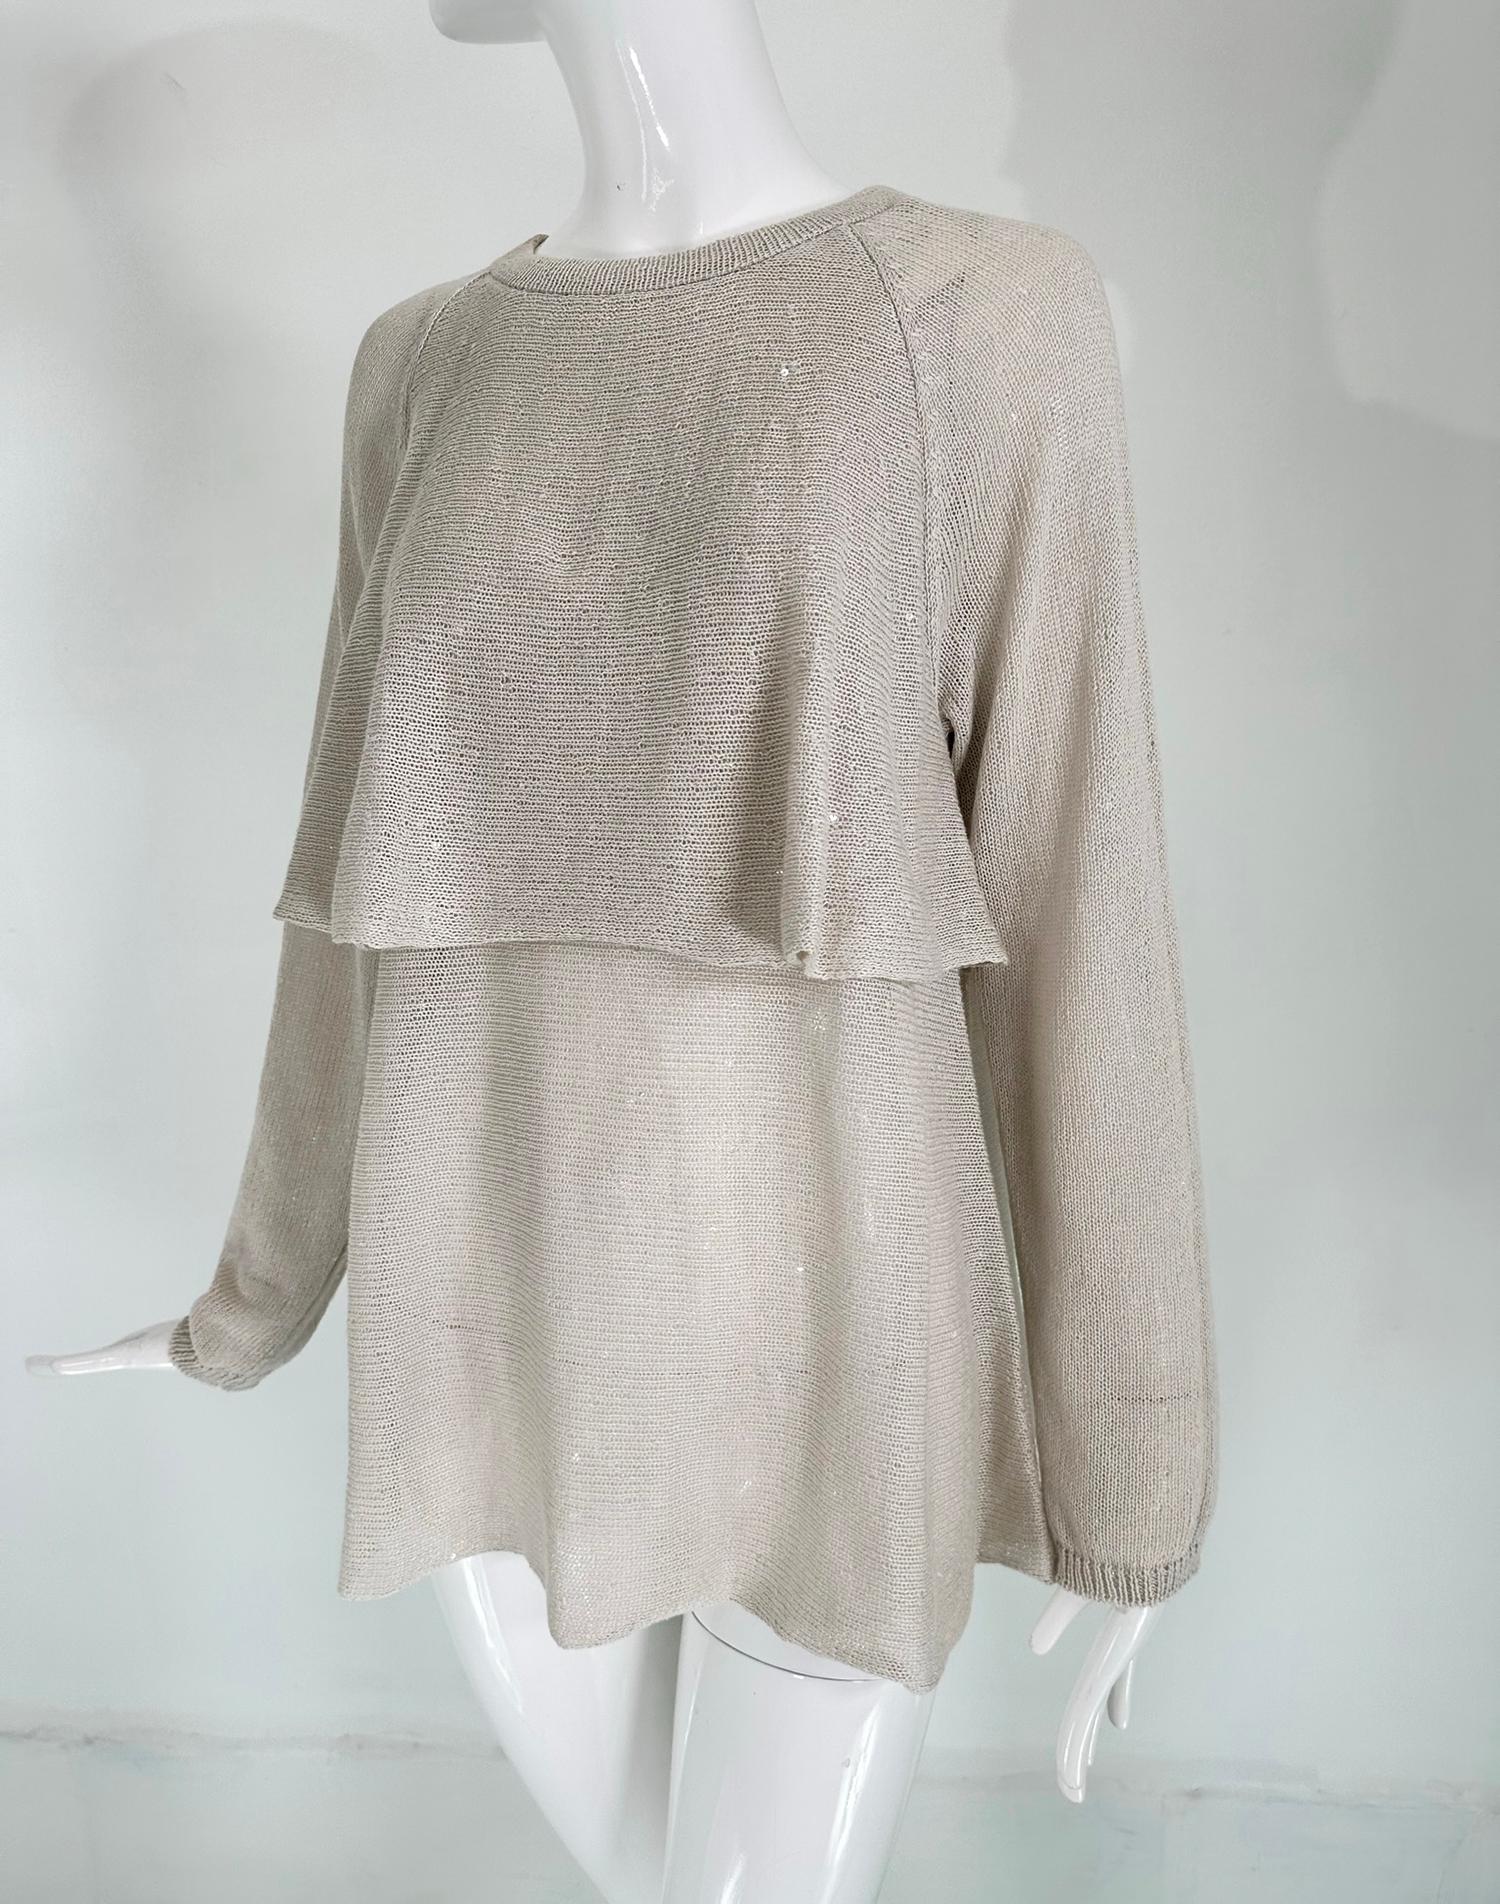 Brunello Cucinelli natural ecru linen & silk, sequin sewn, pullover, layered tunic knit  sweater. Long raglan sleeves, mid torso layered drape front & back. Unworn with tags, irregularities as with all hand knits.
Beautiful sweater perfect to layer